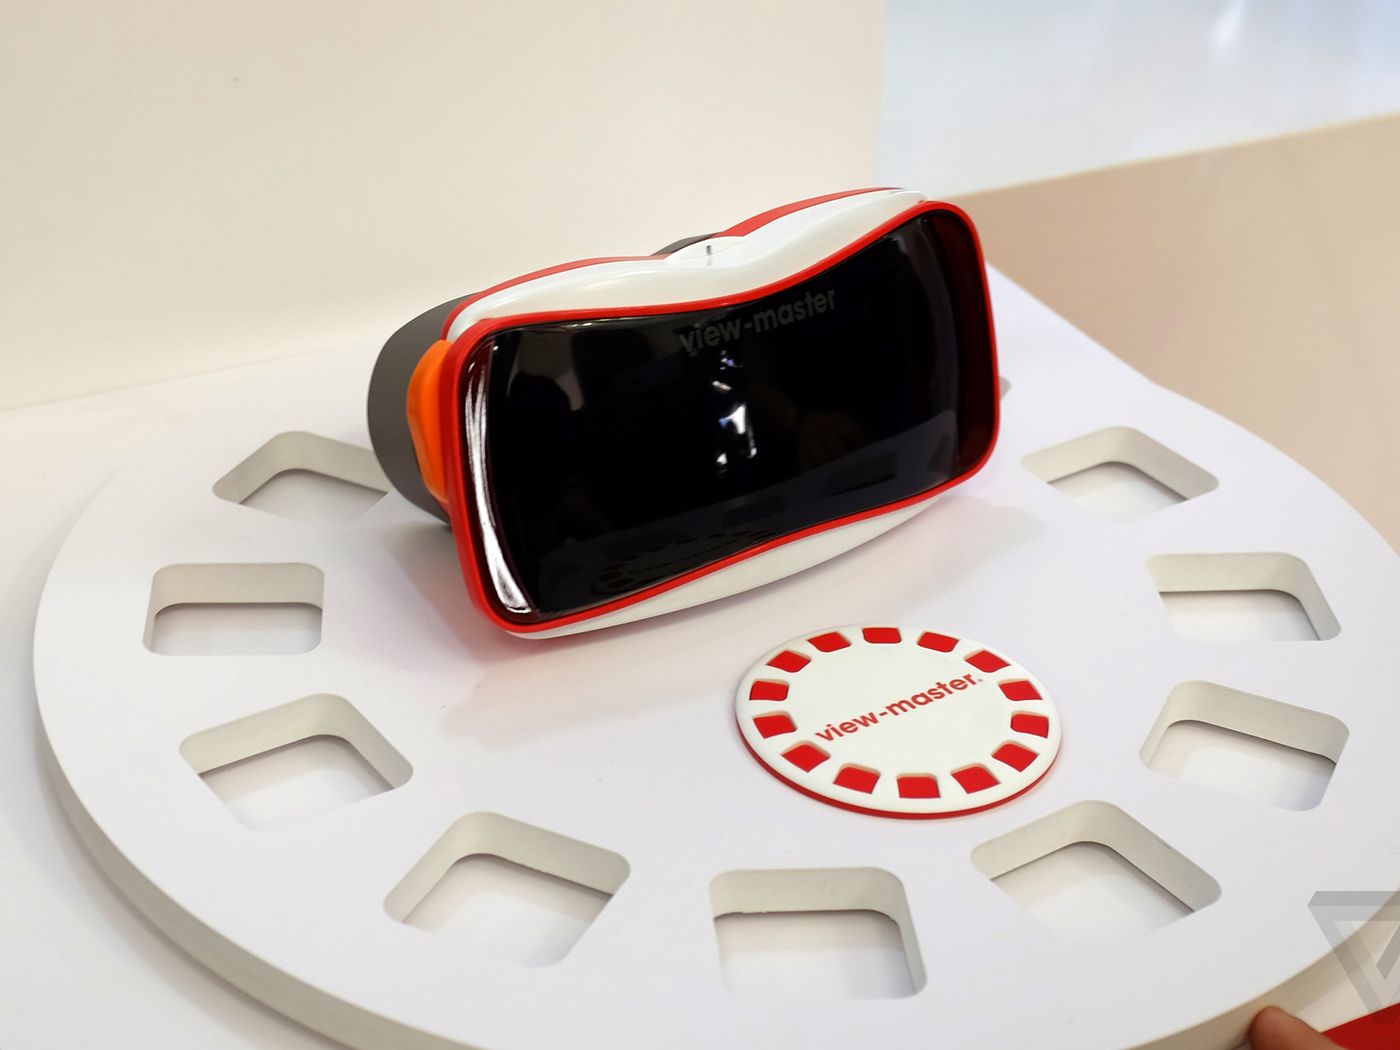 View-Master Wallpapers